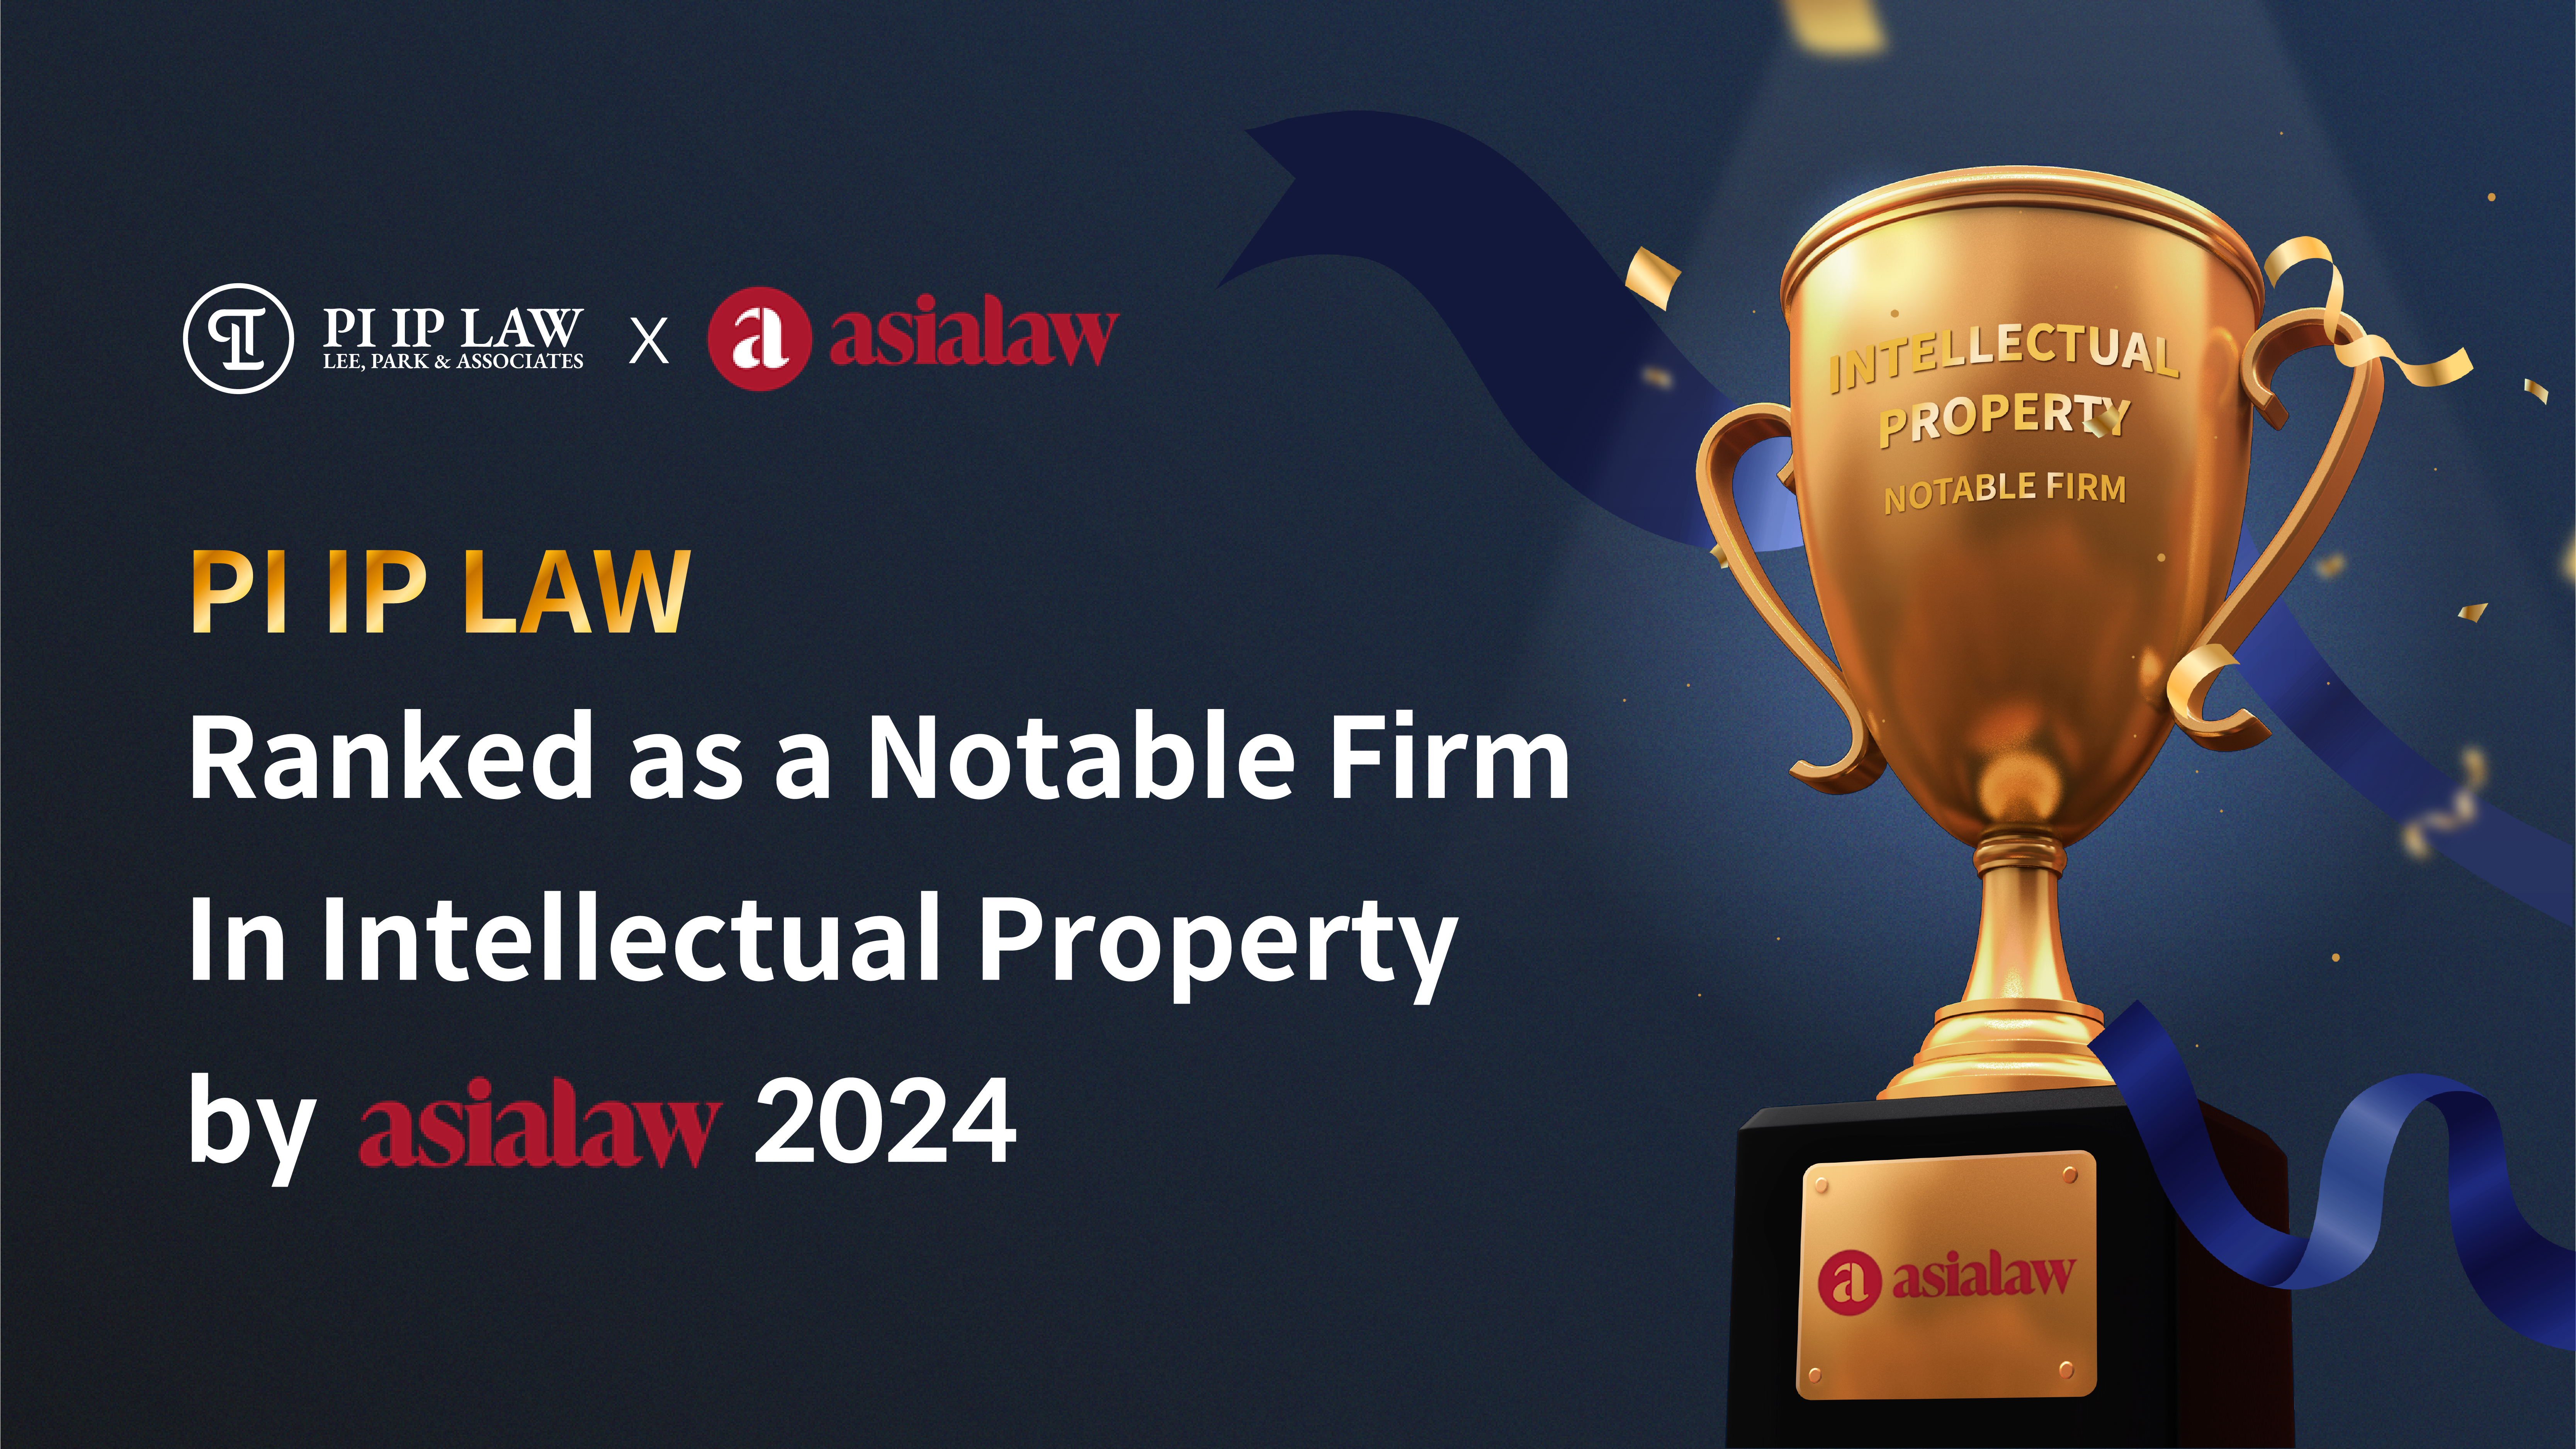 PI IP LAW, Recognized as a Notable Firm in the 2023/2024 Asialaw Rankings